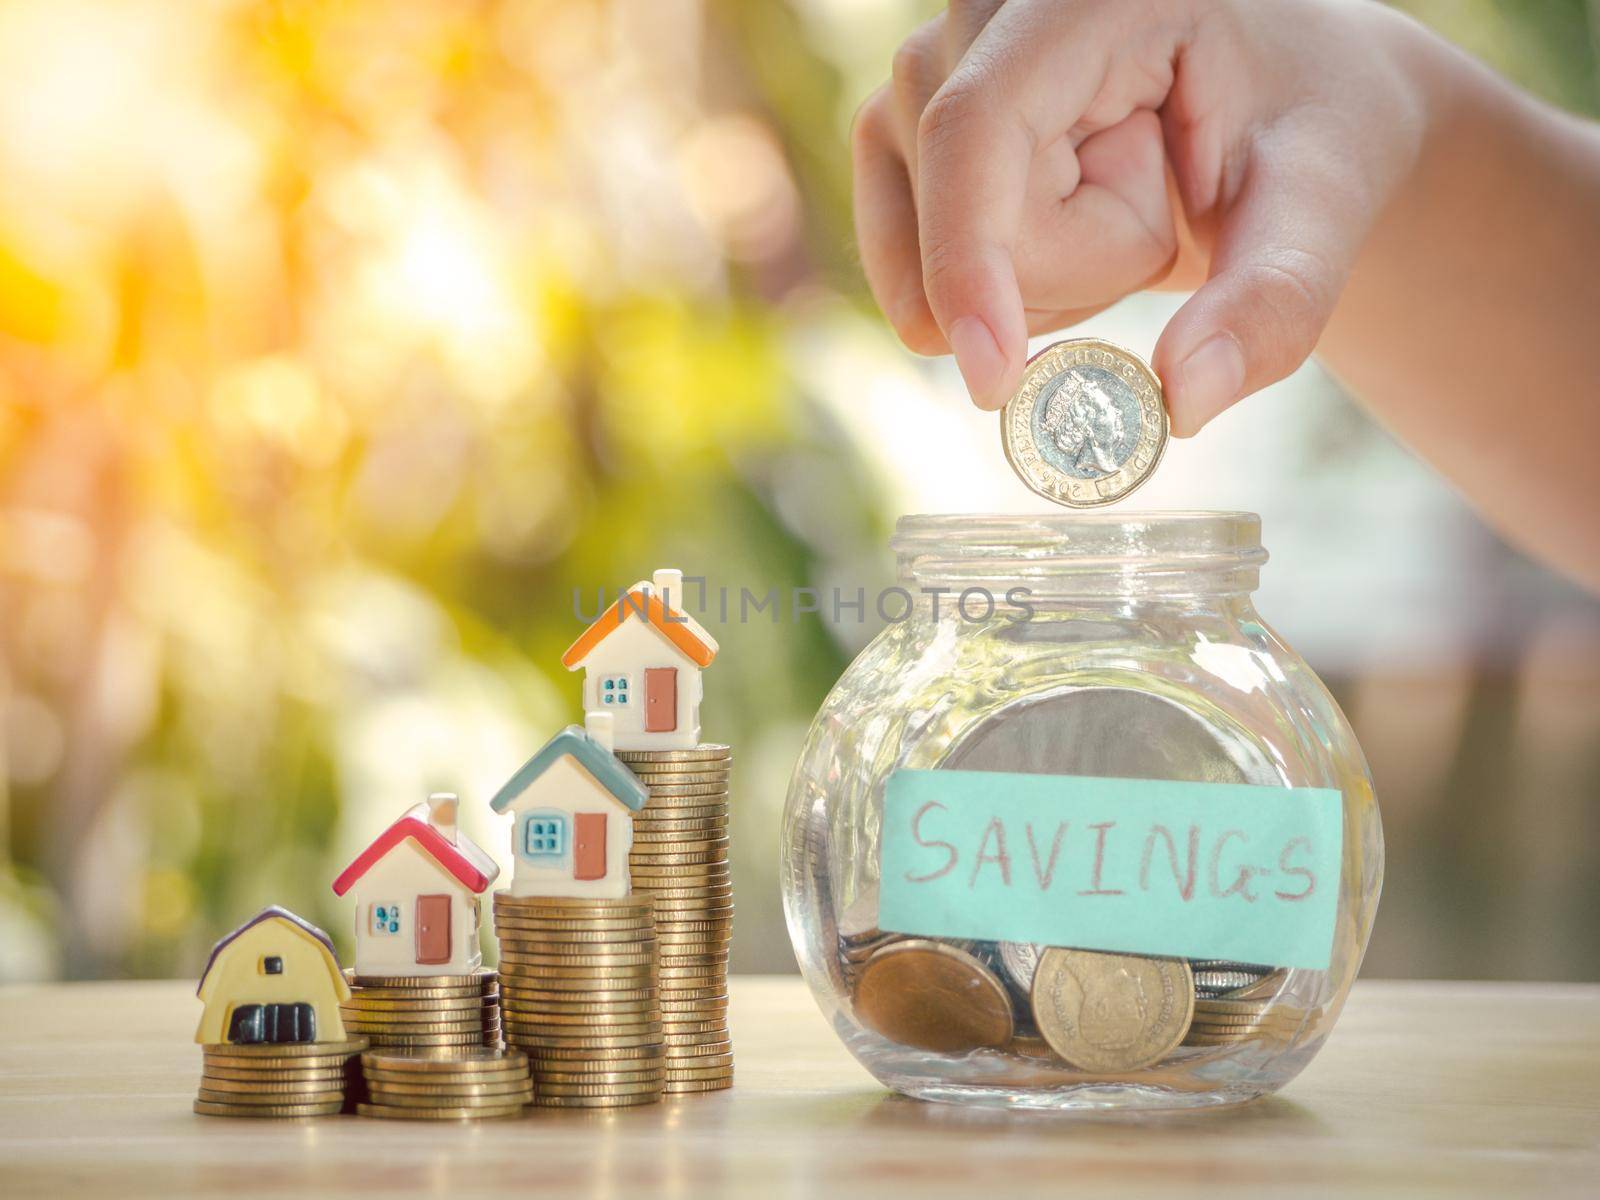 Asian boy holding coins drop a container saving money near home on gold coins stack to save money invest for future and buy home.Concept loan,property ladder,financial, real estate investment, bonus. by Chakreeyarut